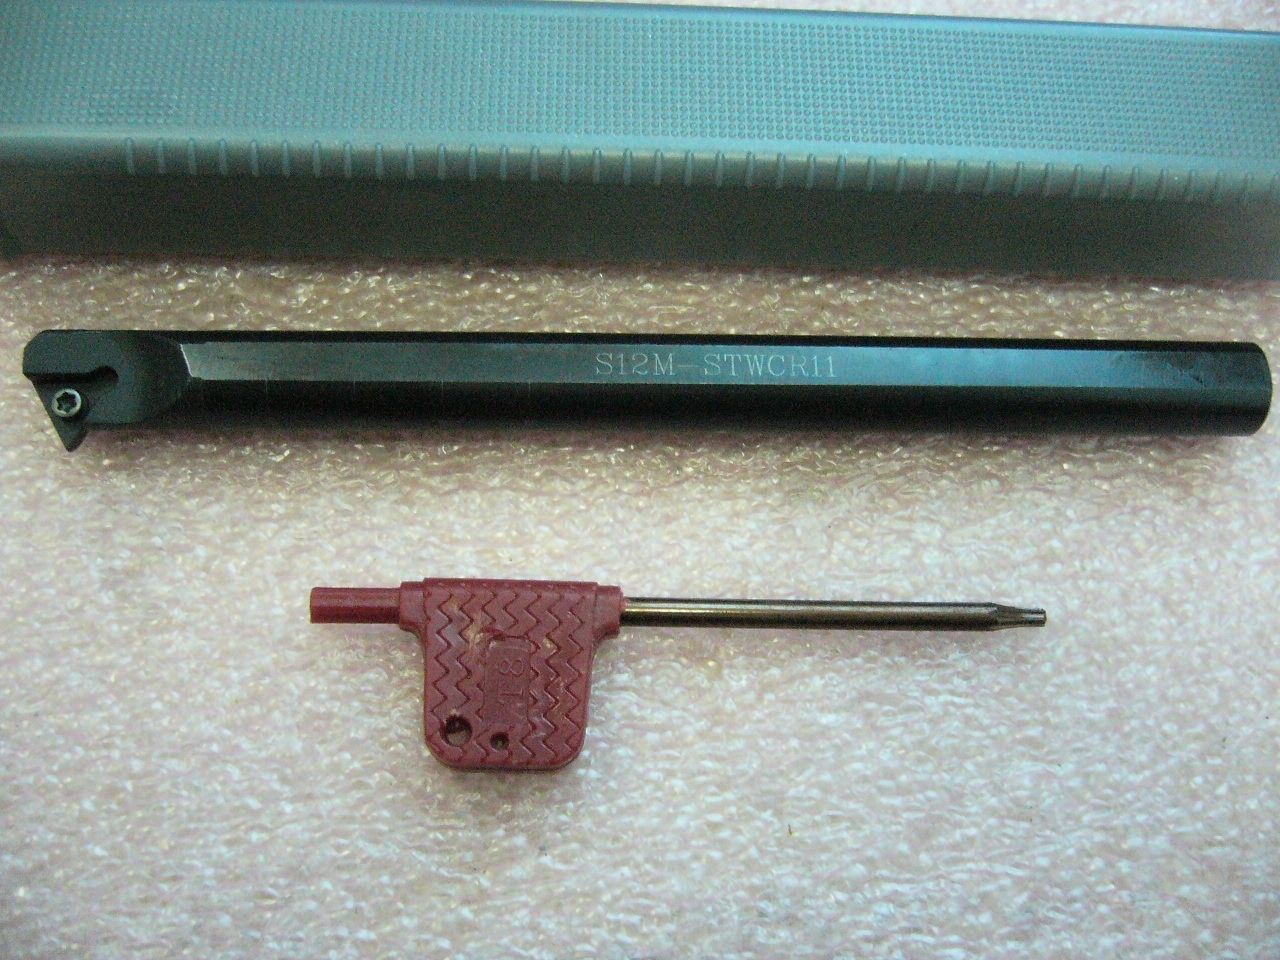 Boring Toolholder S12M-STWCR11 for inserts TCMT1102.. TCMT21.5... - Click Image to Close